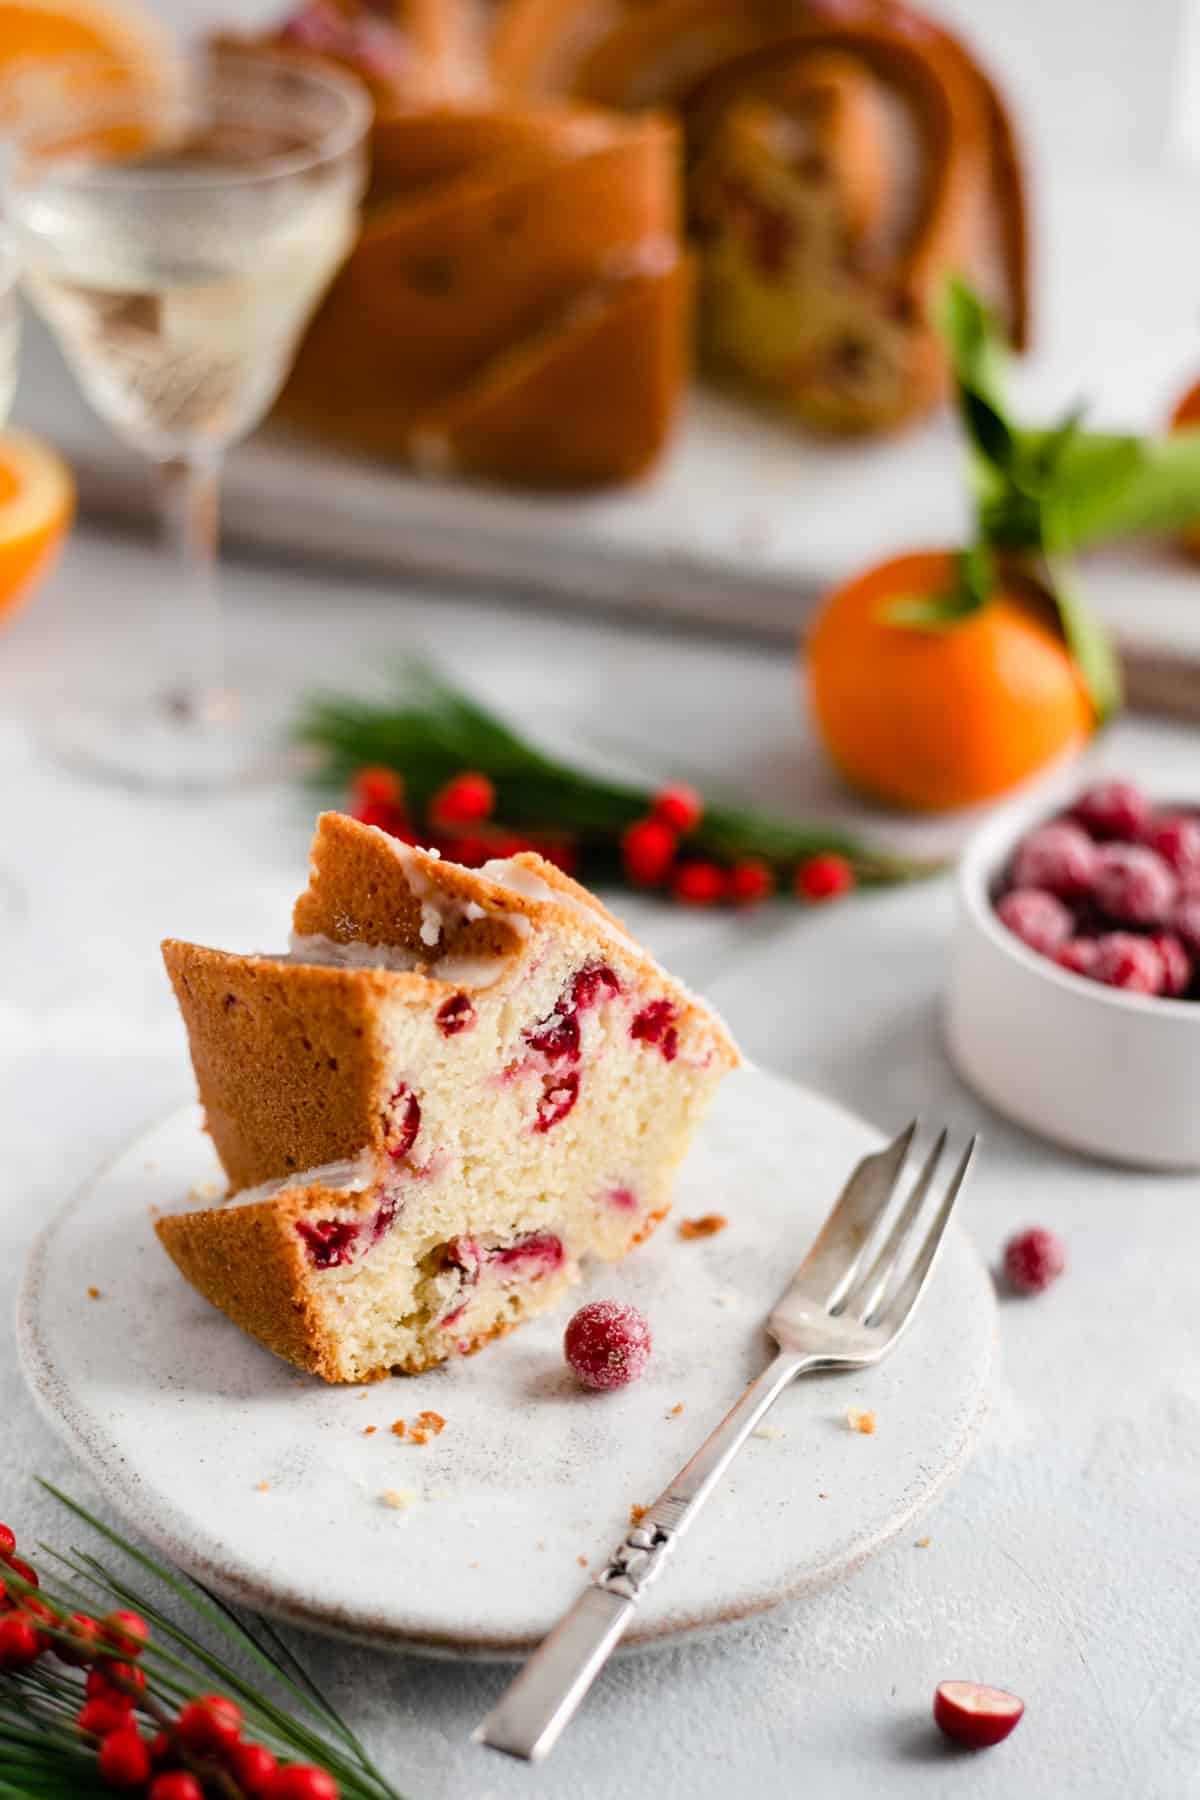 Slice of orange and cranberry cake on a plate with a small fork